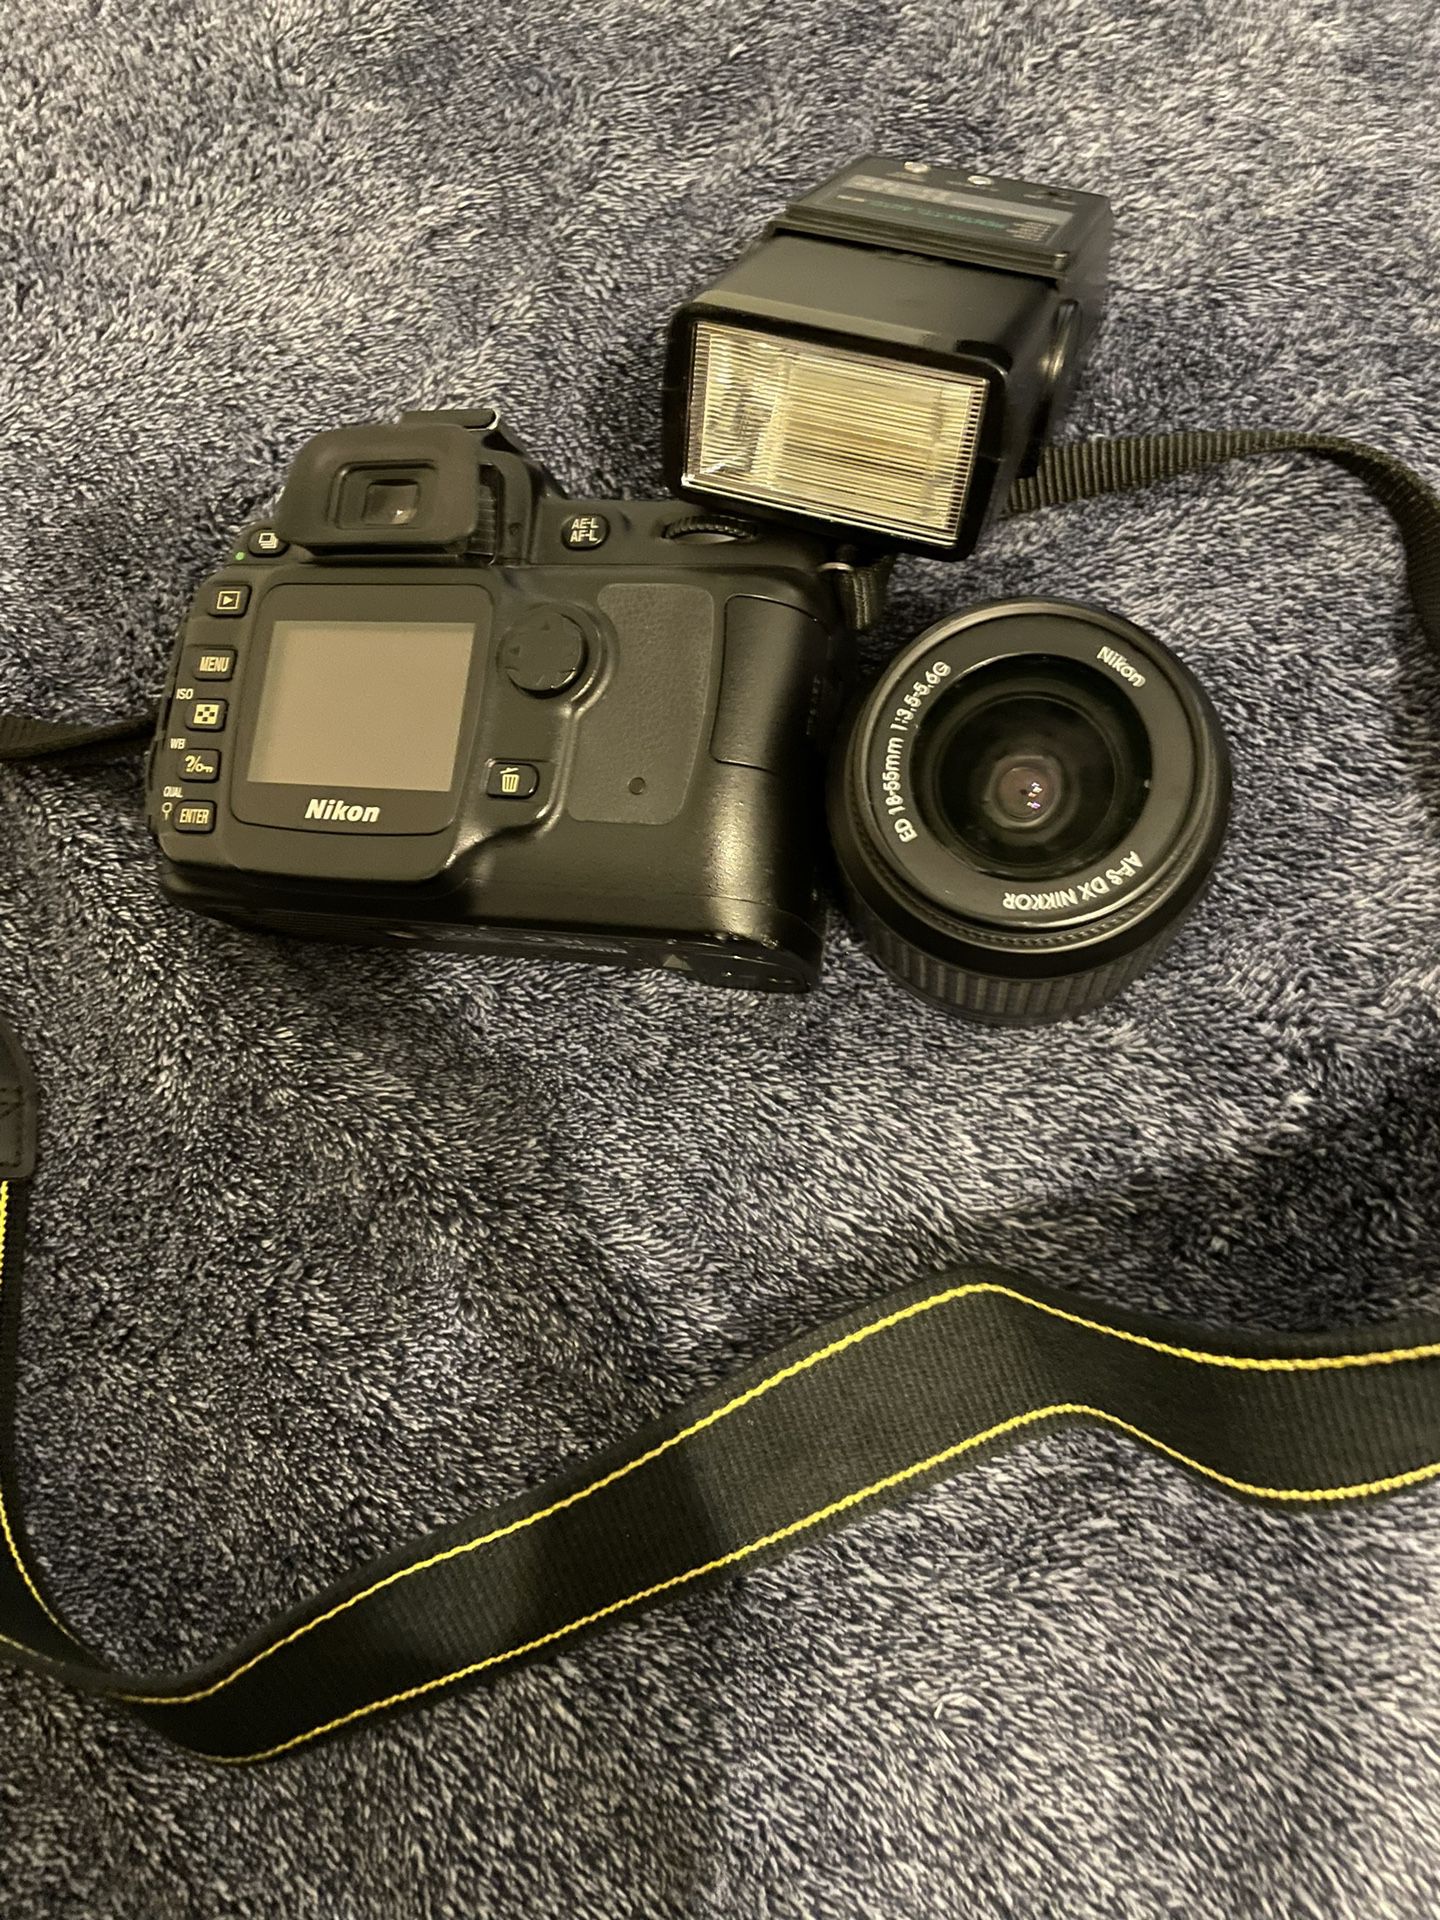 Nikon D50 With Extras